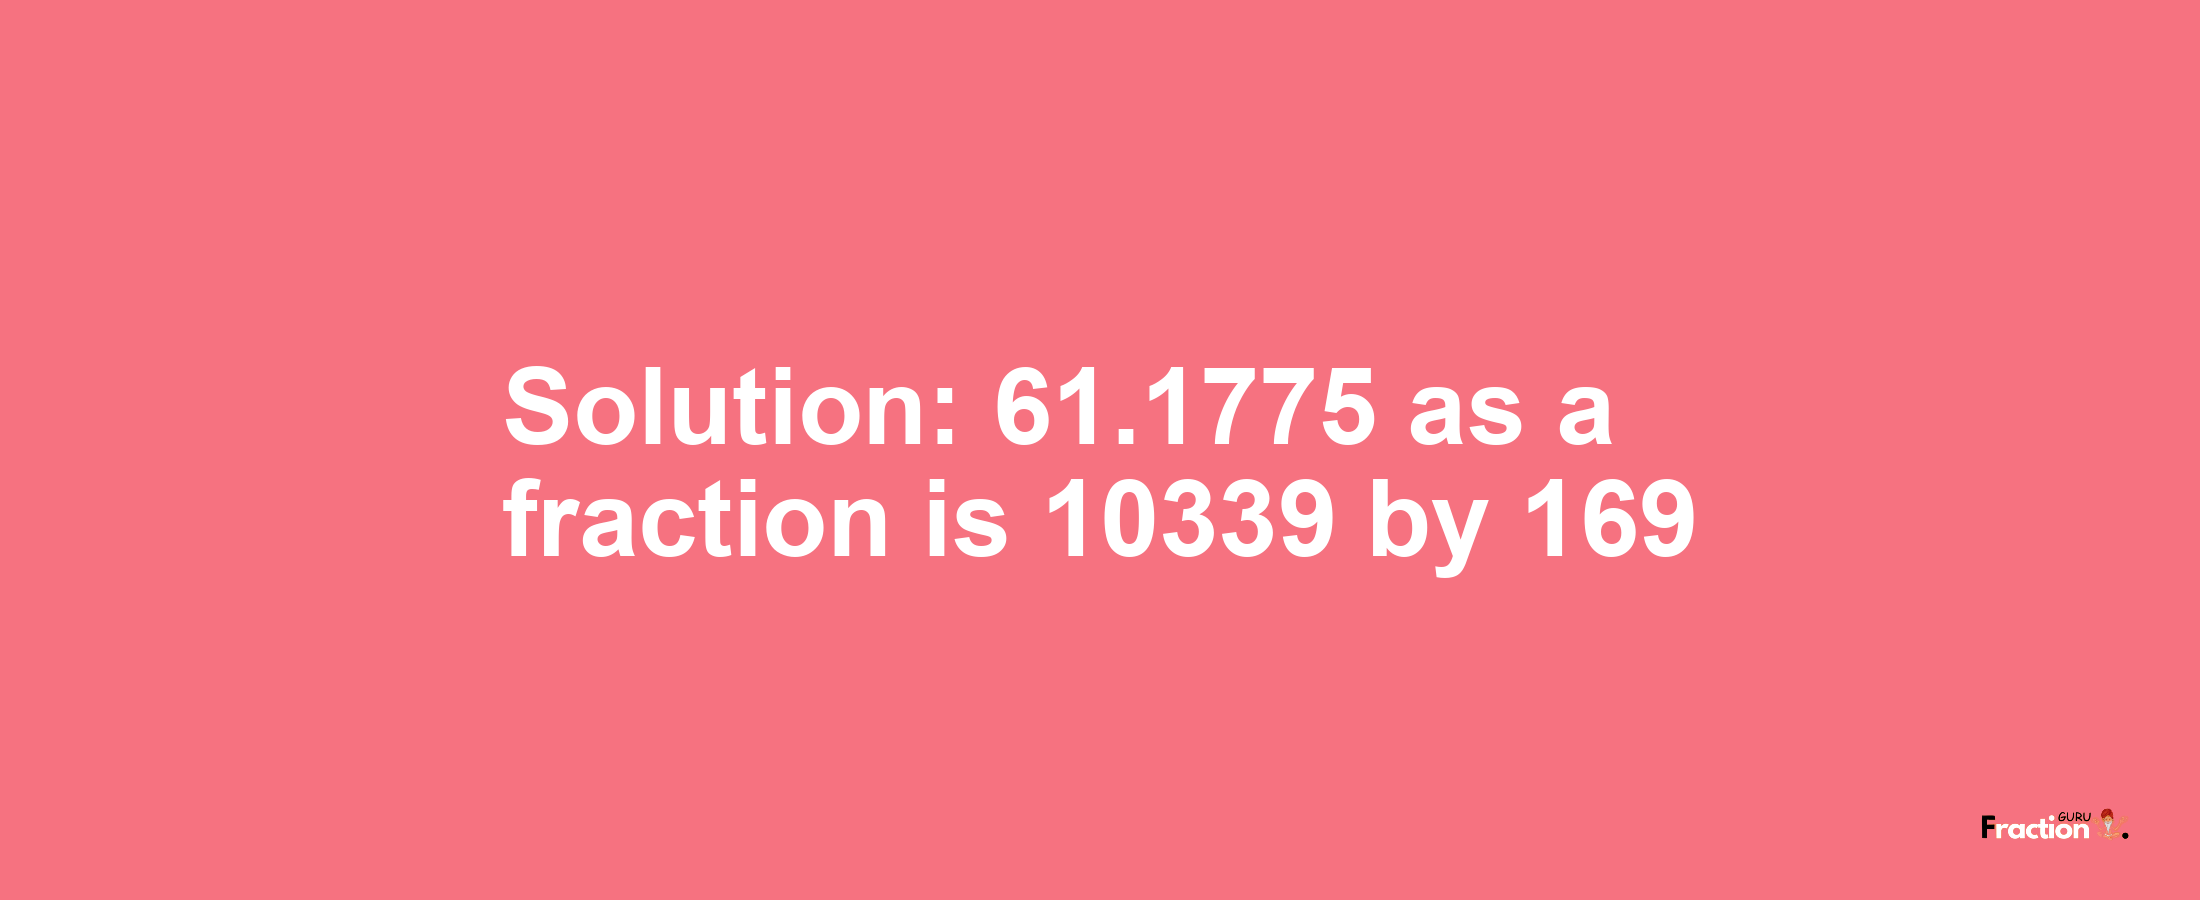 Solution:61.1775 as a fraction is 10339/169